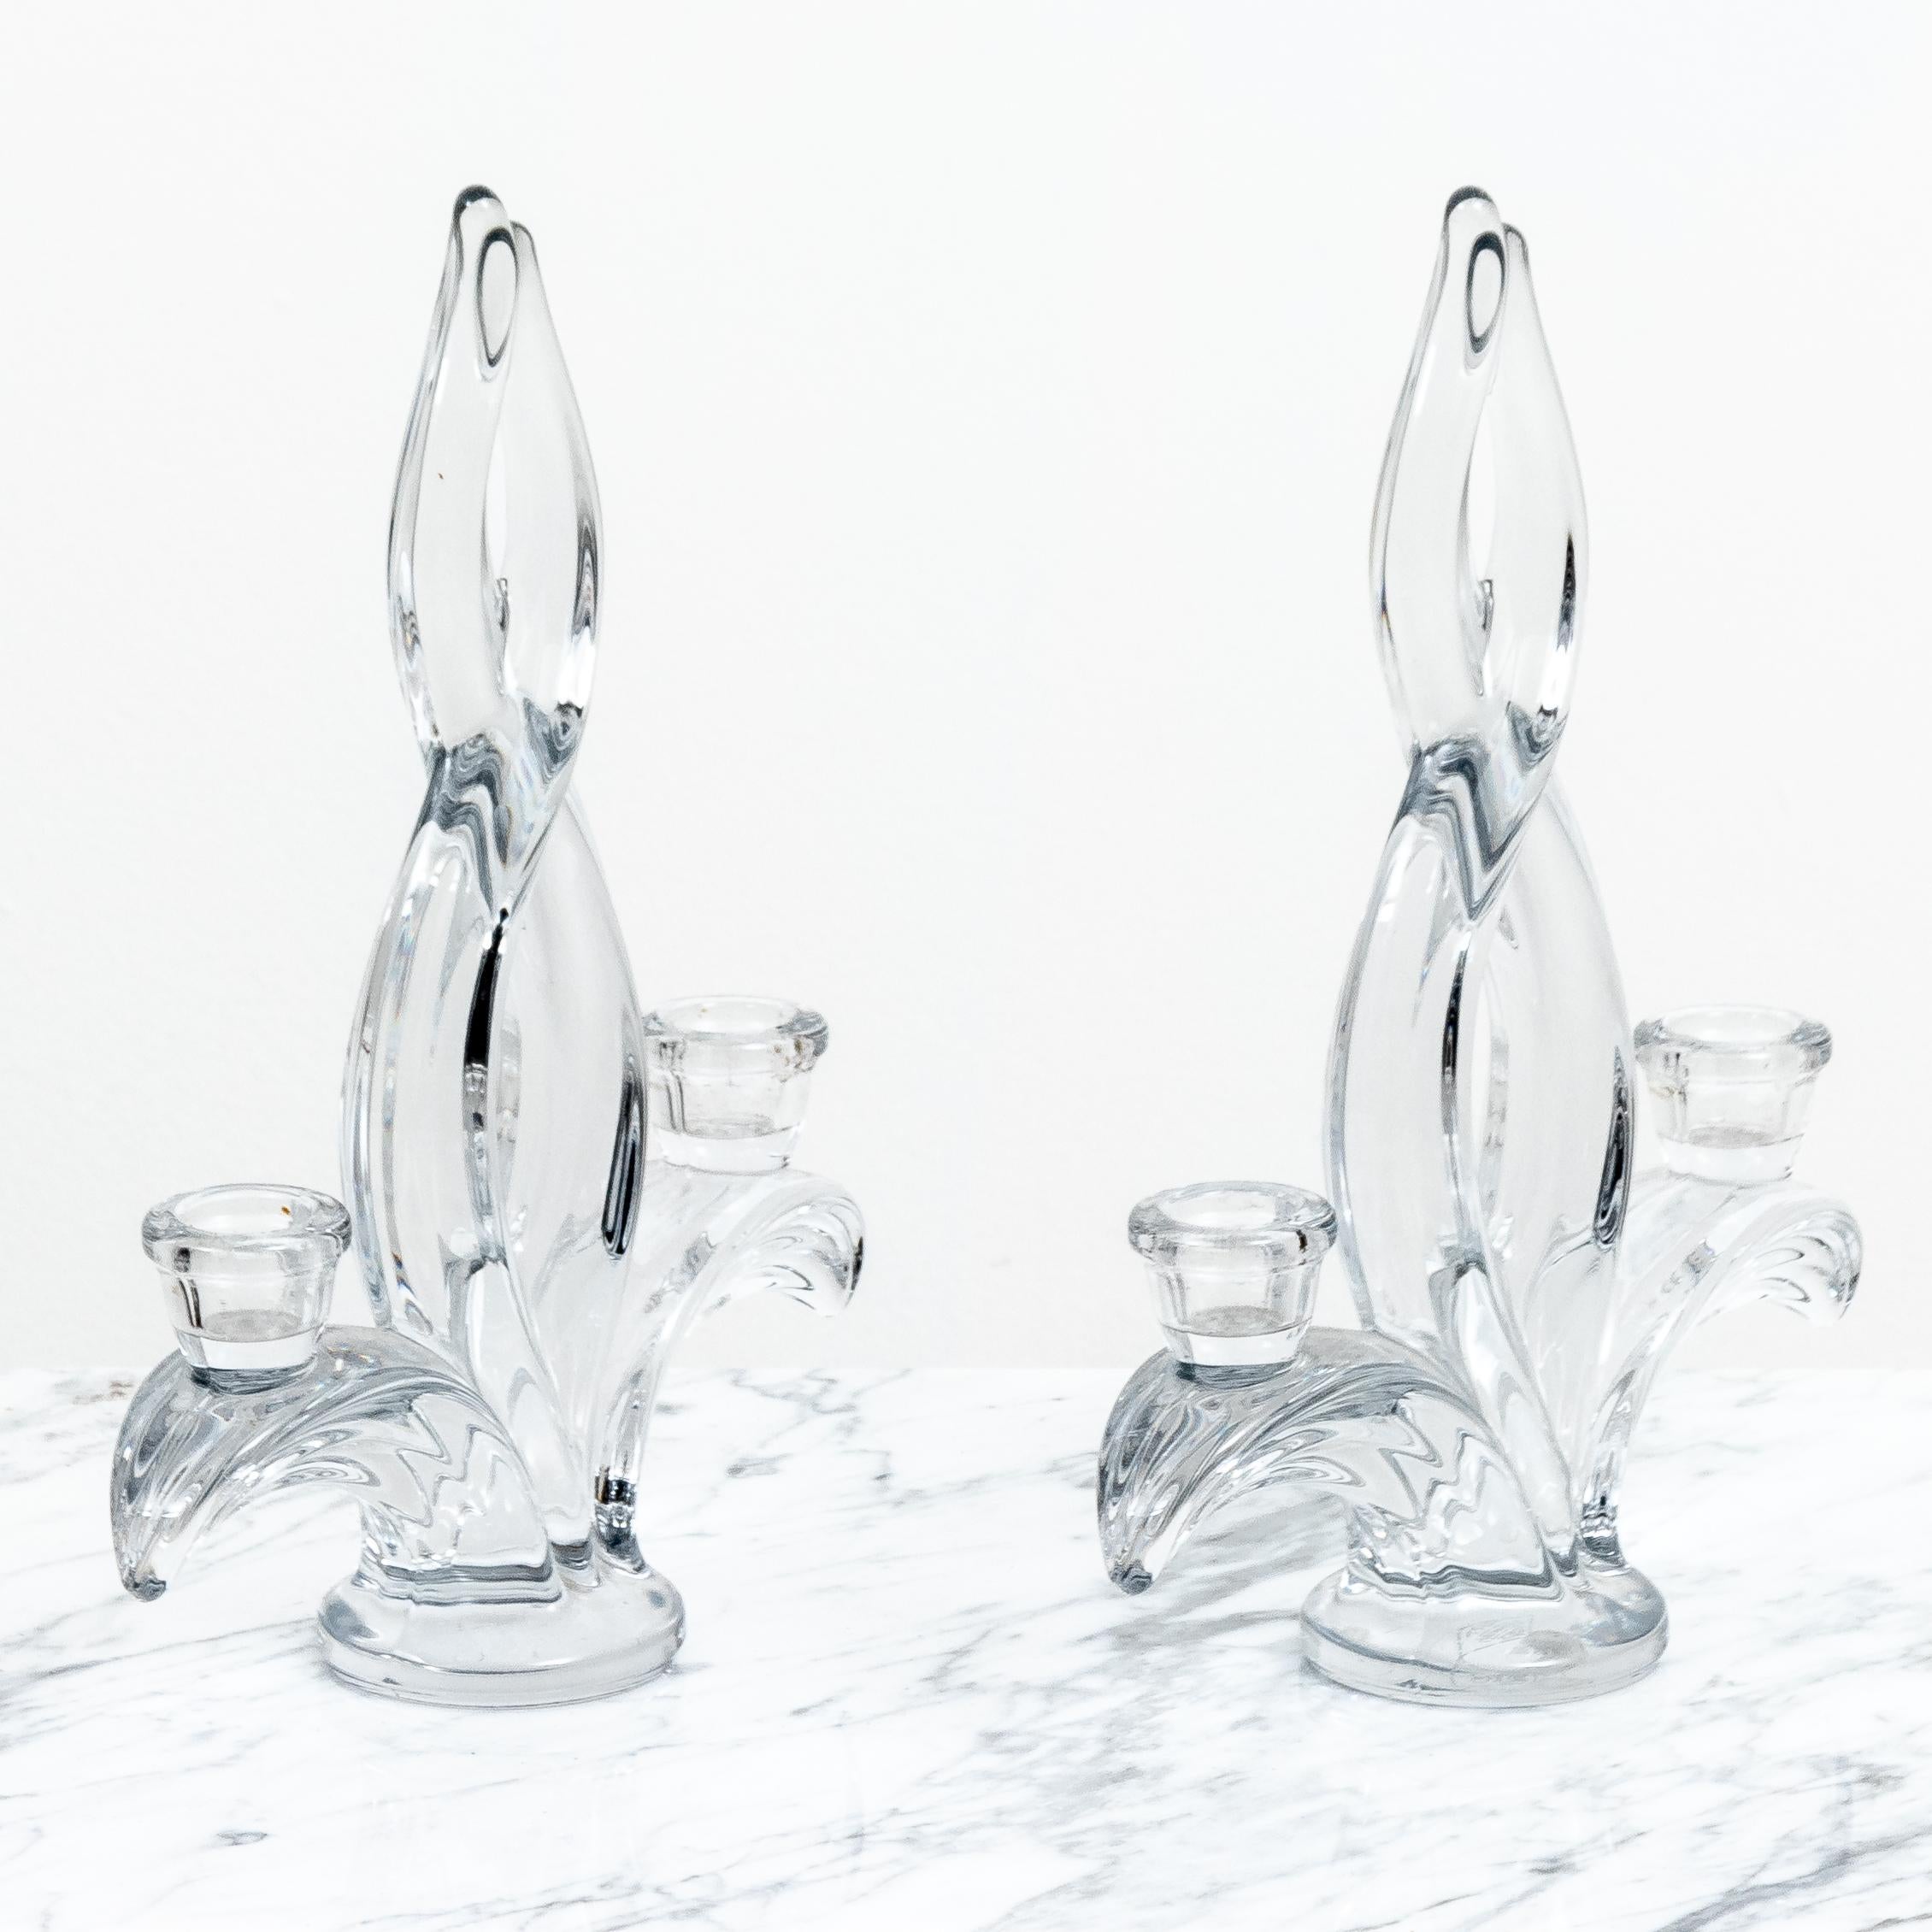 Pair of glass candlesticks with an elegant, barley twist design, circa mid-20th century. Please note of wear consistent with age.